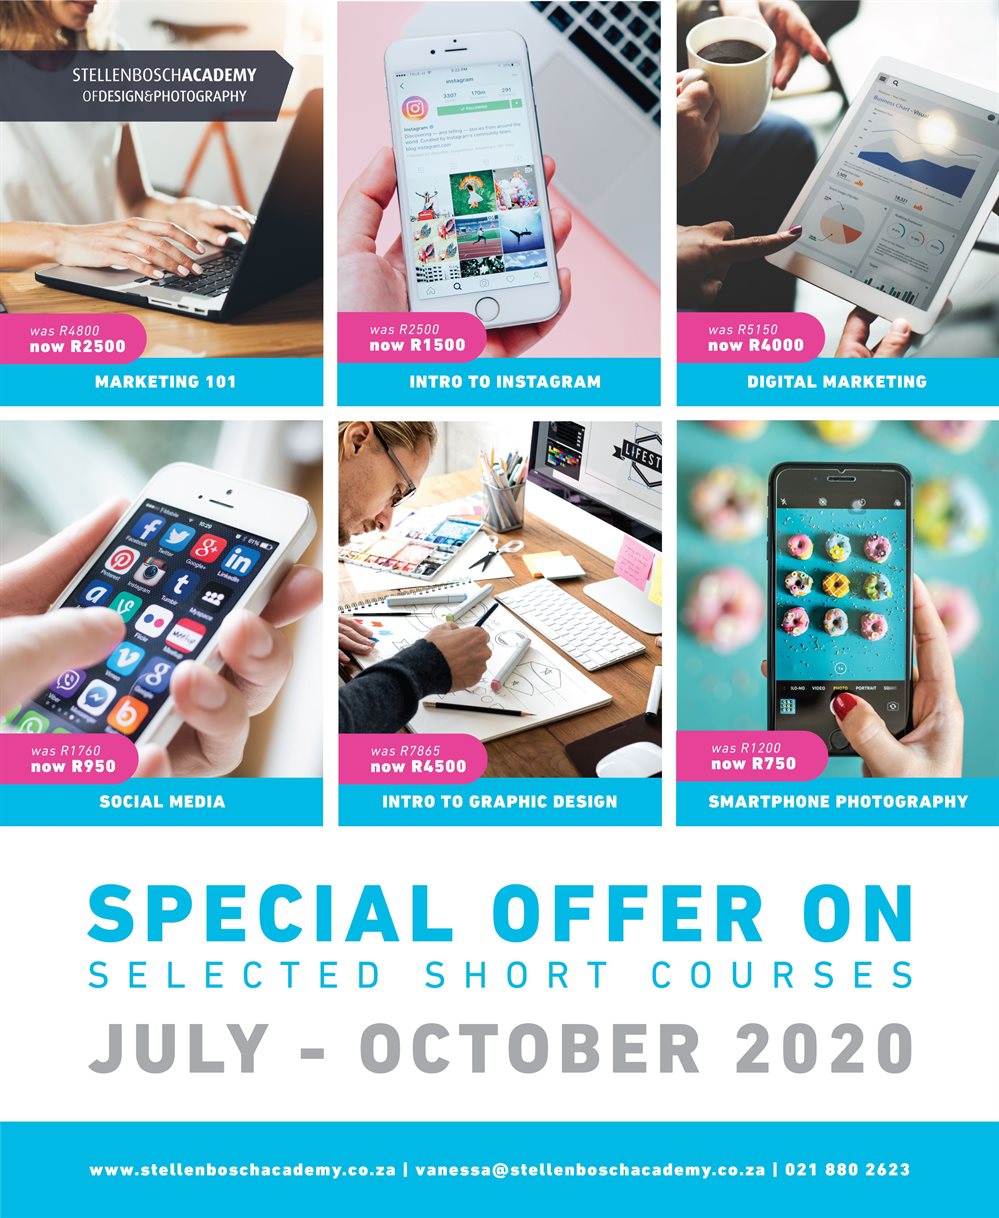 Special offer on selected online short courses: July-October 2020